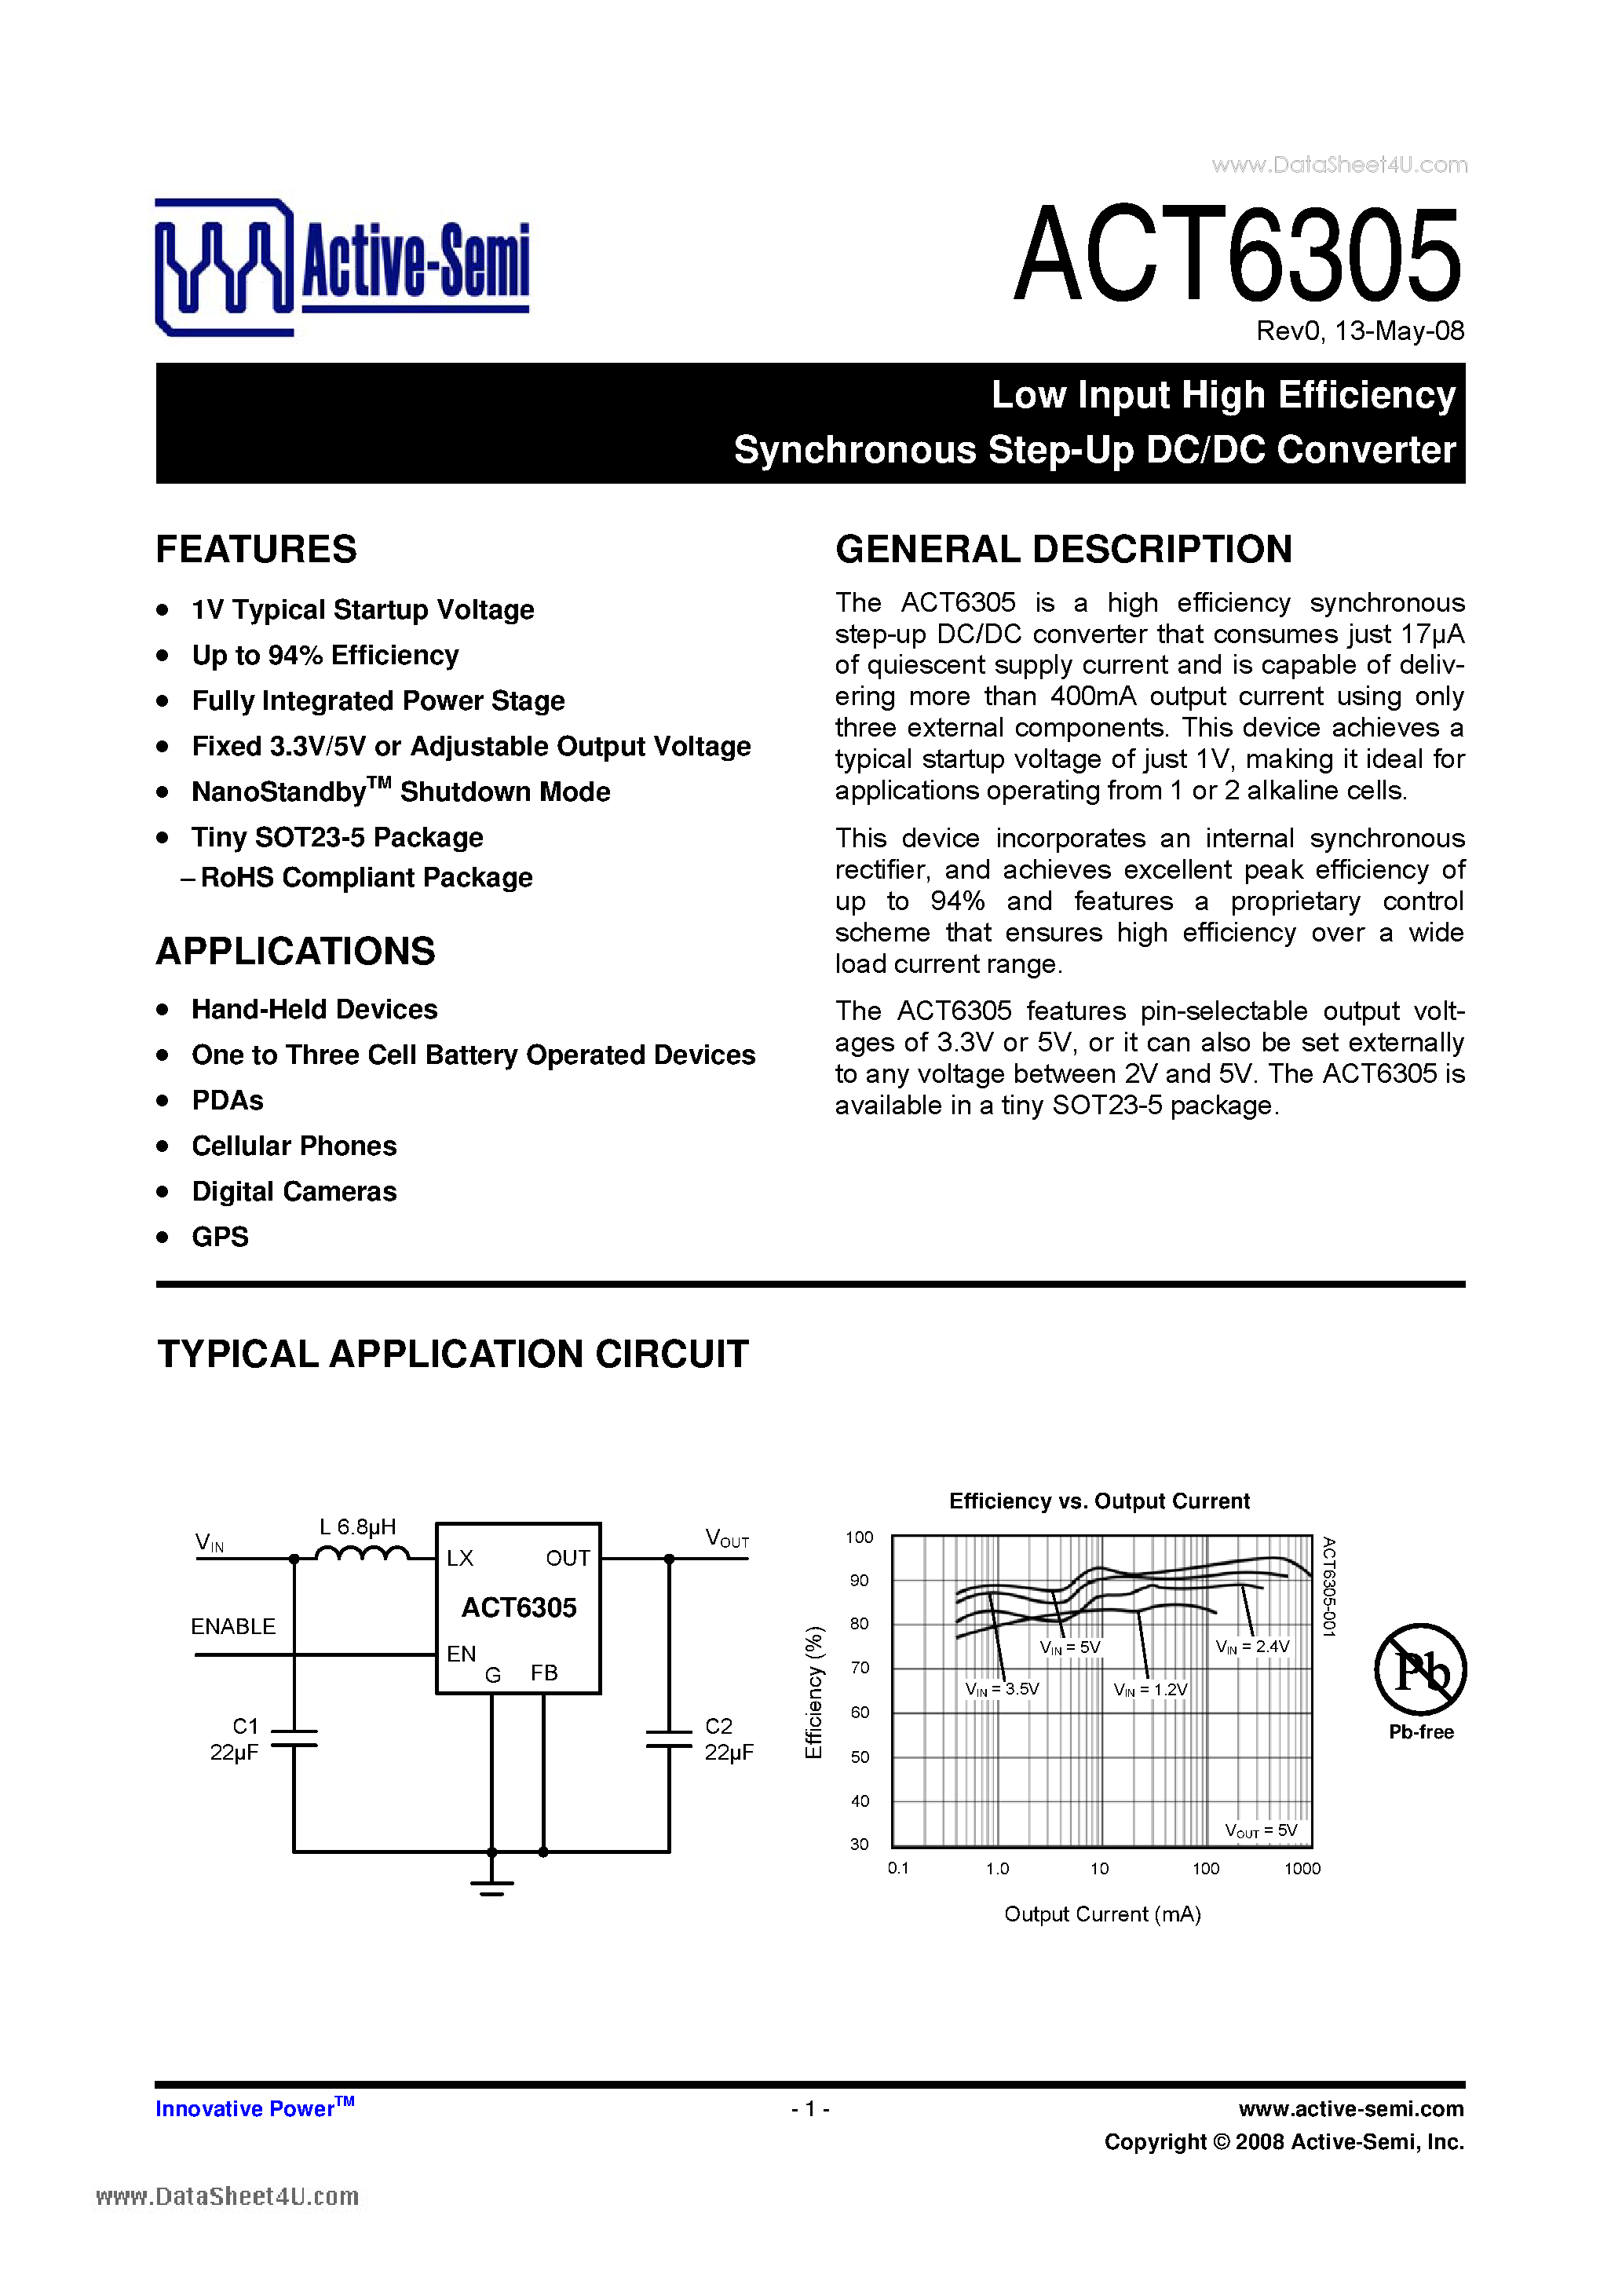 Даташит ACT6305 - Low Input High Efficiency Synchronous Step-Up DC/DC Converter страница 1